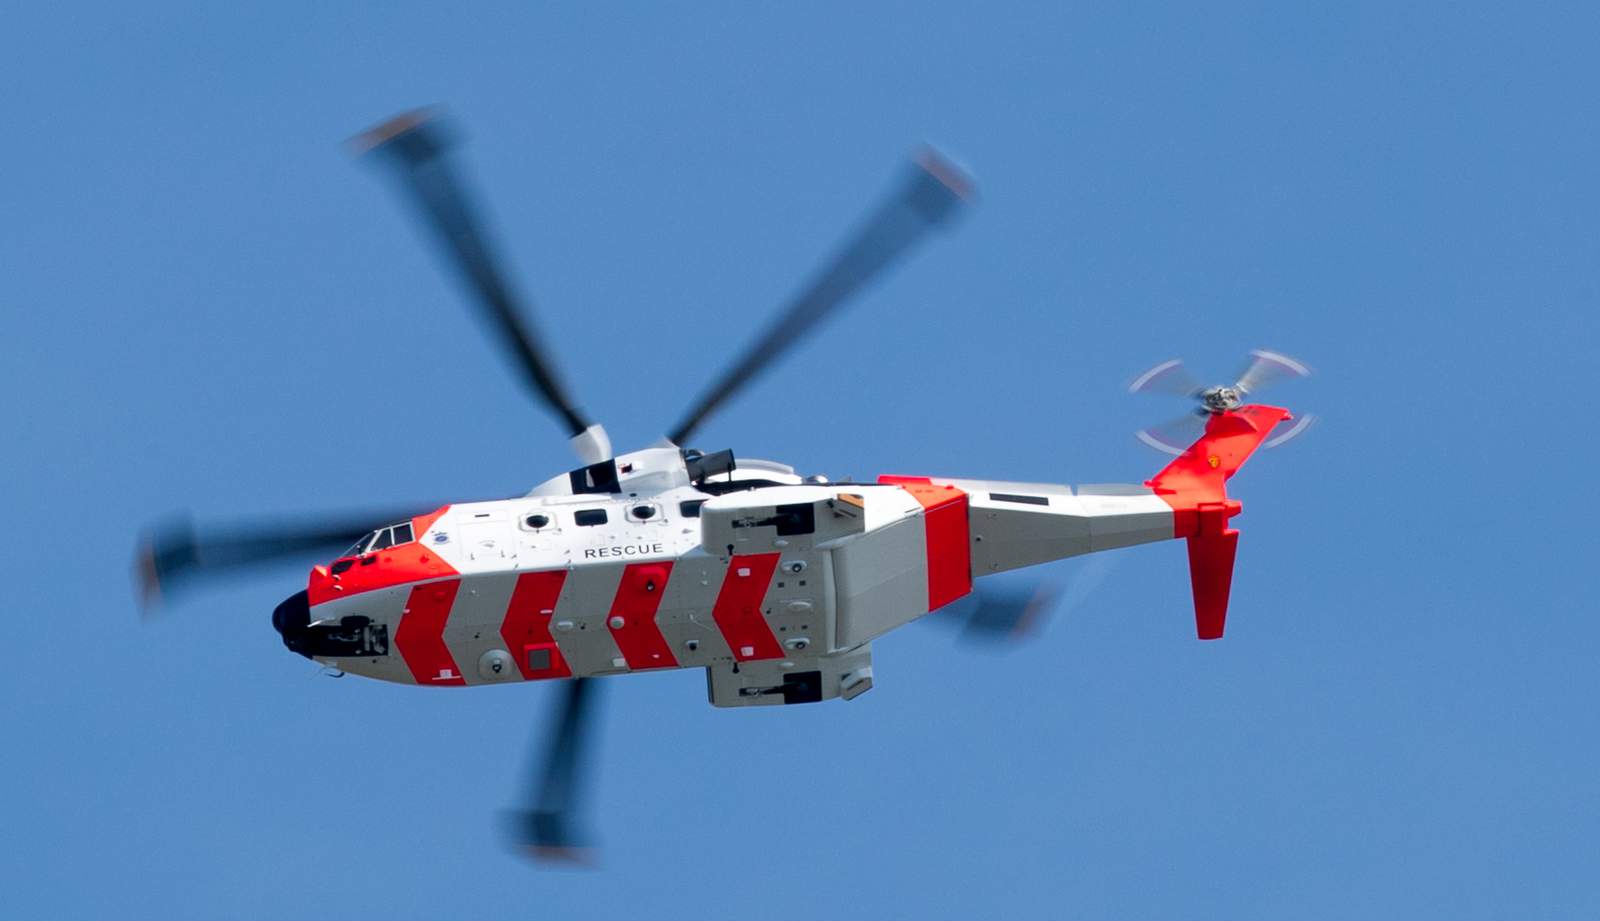 After 84-hour search, Coast Guard suspends search for 20 people on boat from Bahamas